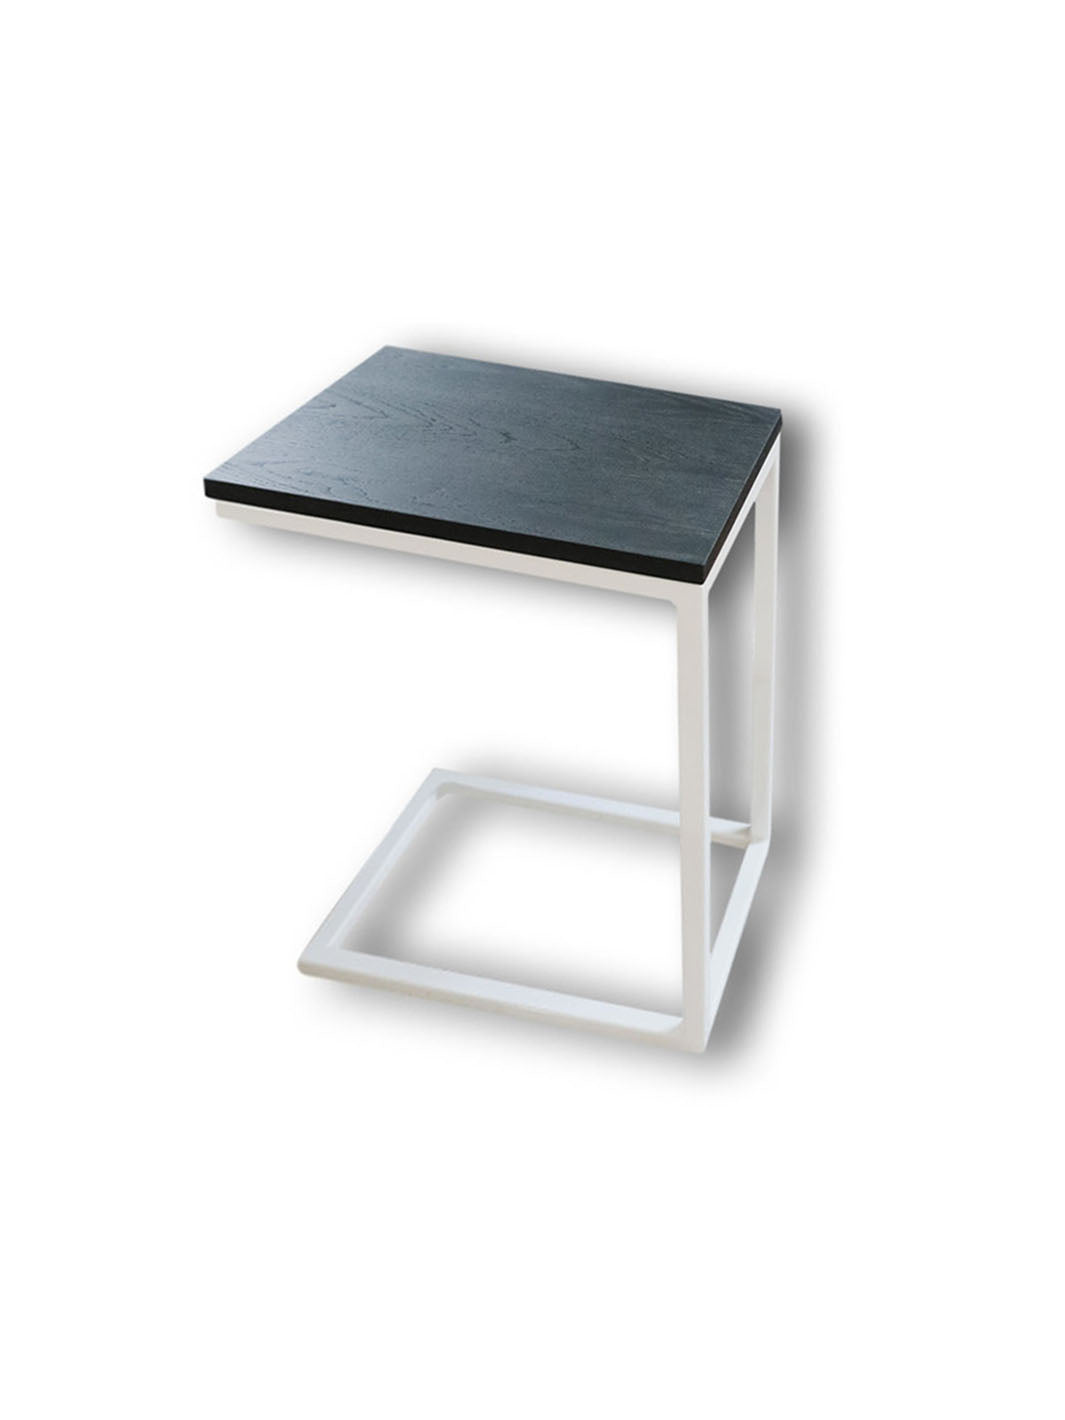 Charcoal Black Ash Industrial Side C Table with White Base Earthly Comfort Side Tables 1108